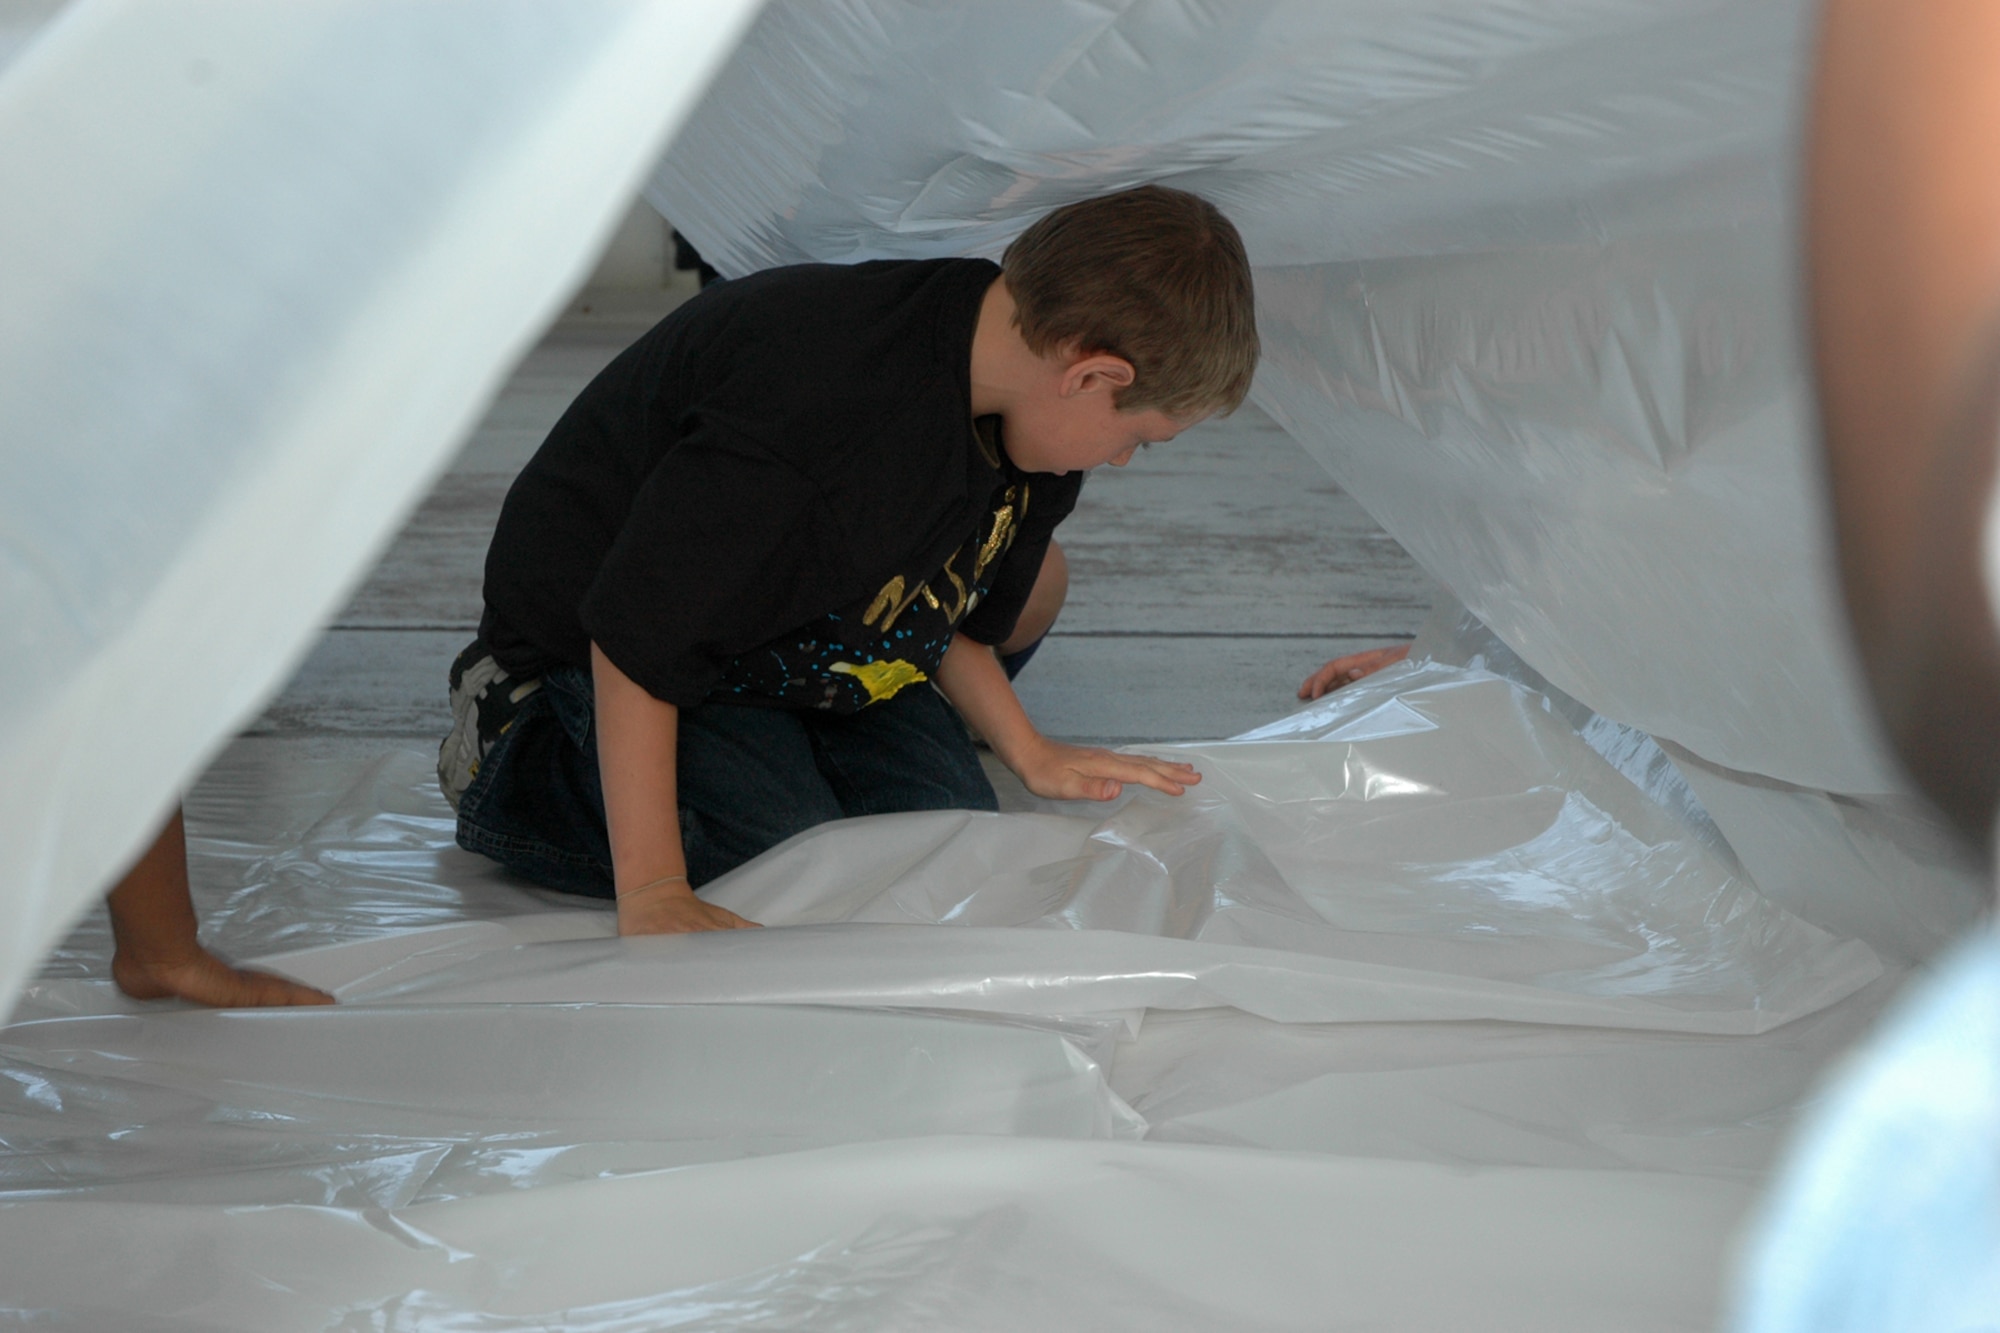 EGLIN AIR FORCE BASE, Fla. -- Merle Thumma, 11, a fifth grader from Longwood Elementary, folds the plastic shelter into place during Marsville April 20 inside Hangar 110.The folds were in preparation for inflating the plastic shelter. Fifth-grade students from three elementary schools kicked off the Marsville Project culminating six weeks of study about space. The project required students from Cherokee, Valparaiso and Longwood Elementary Schools to experience a day of living in "space" by building a habitat. During the weeks prior to Marsville, students learned about the life support systems to consider before travel into space, such as the need for air, water, transportation and garbage disposal. Each student built a life support system model to bring with them. (U.S. Air Force photo by Staff Sgt. Mike Meares)